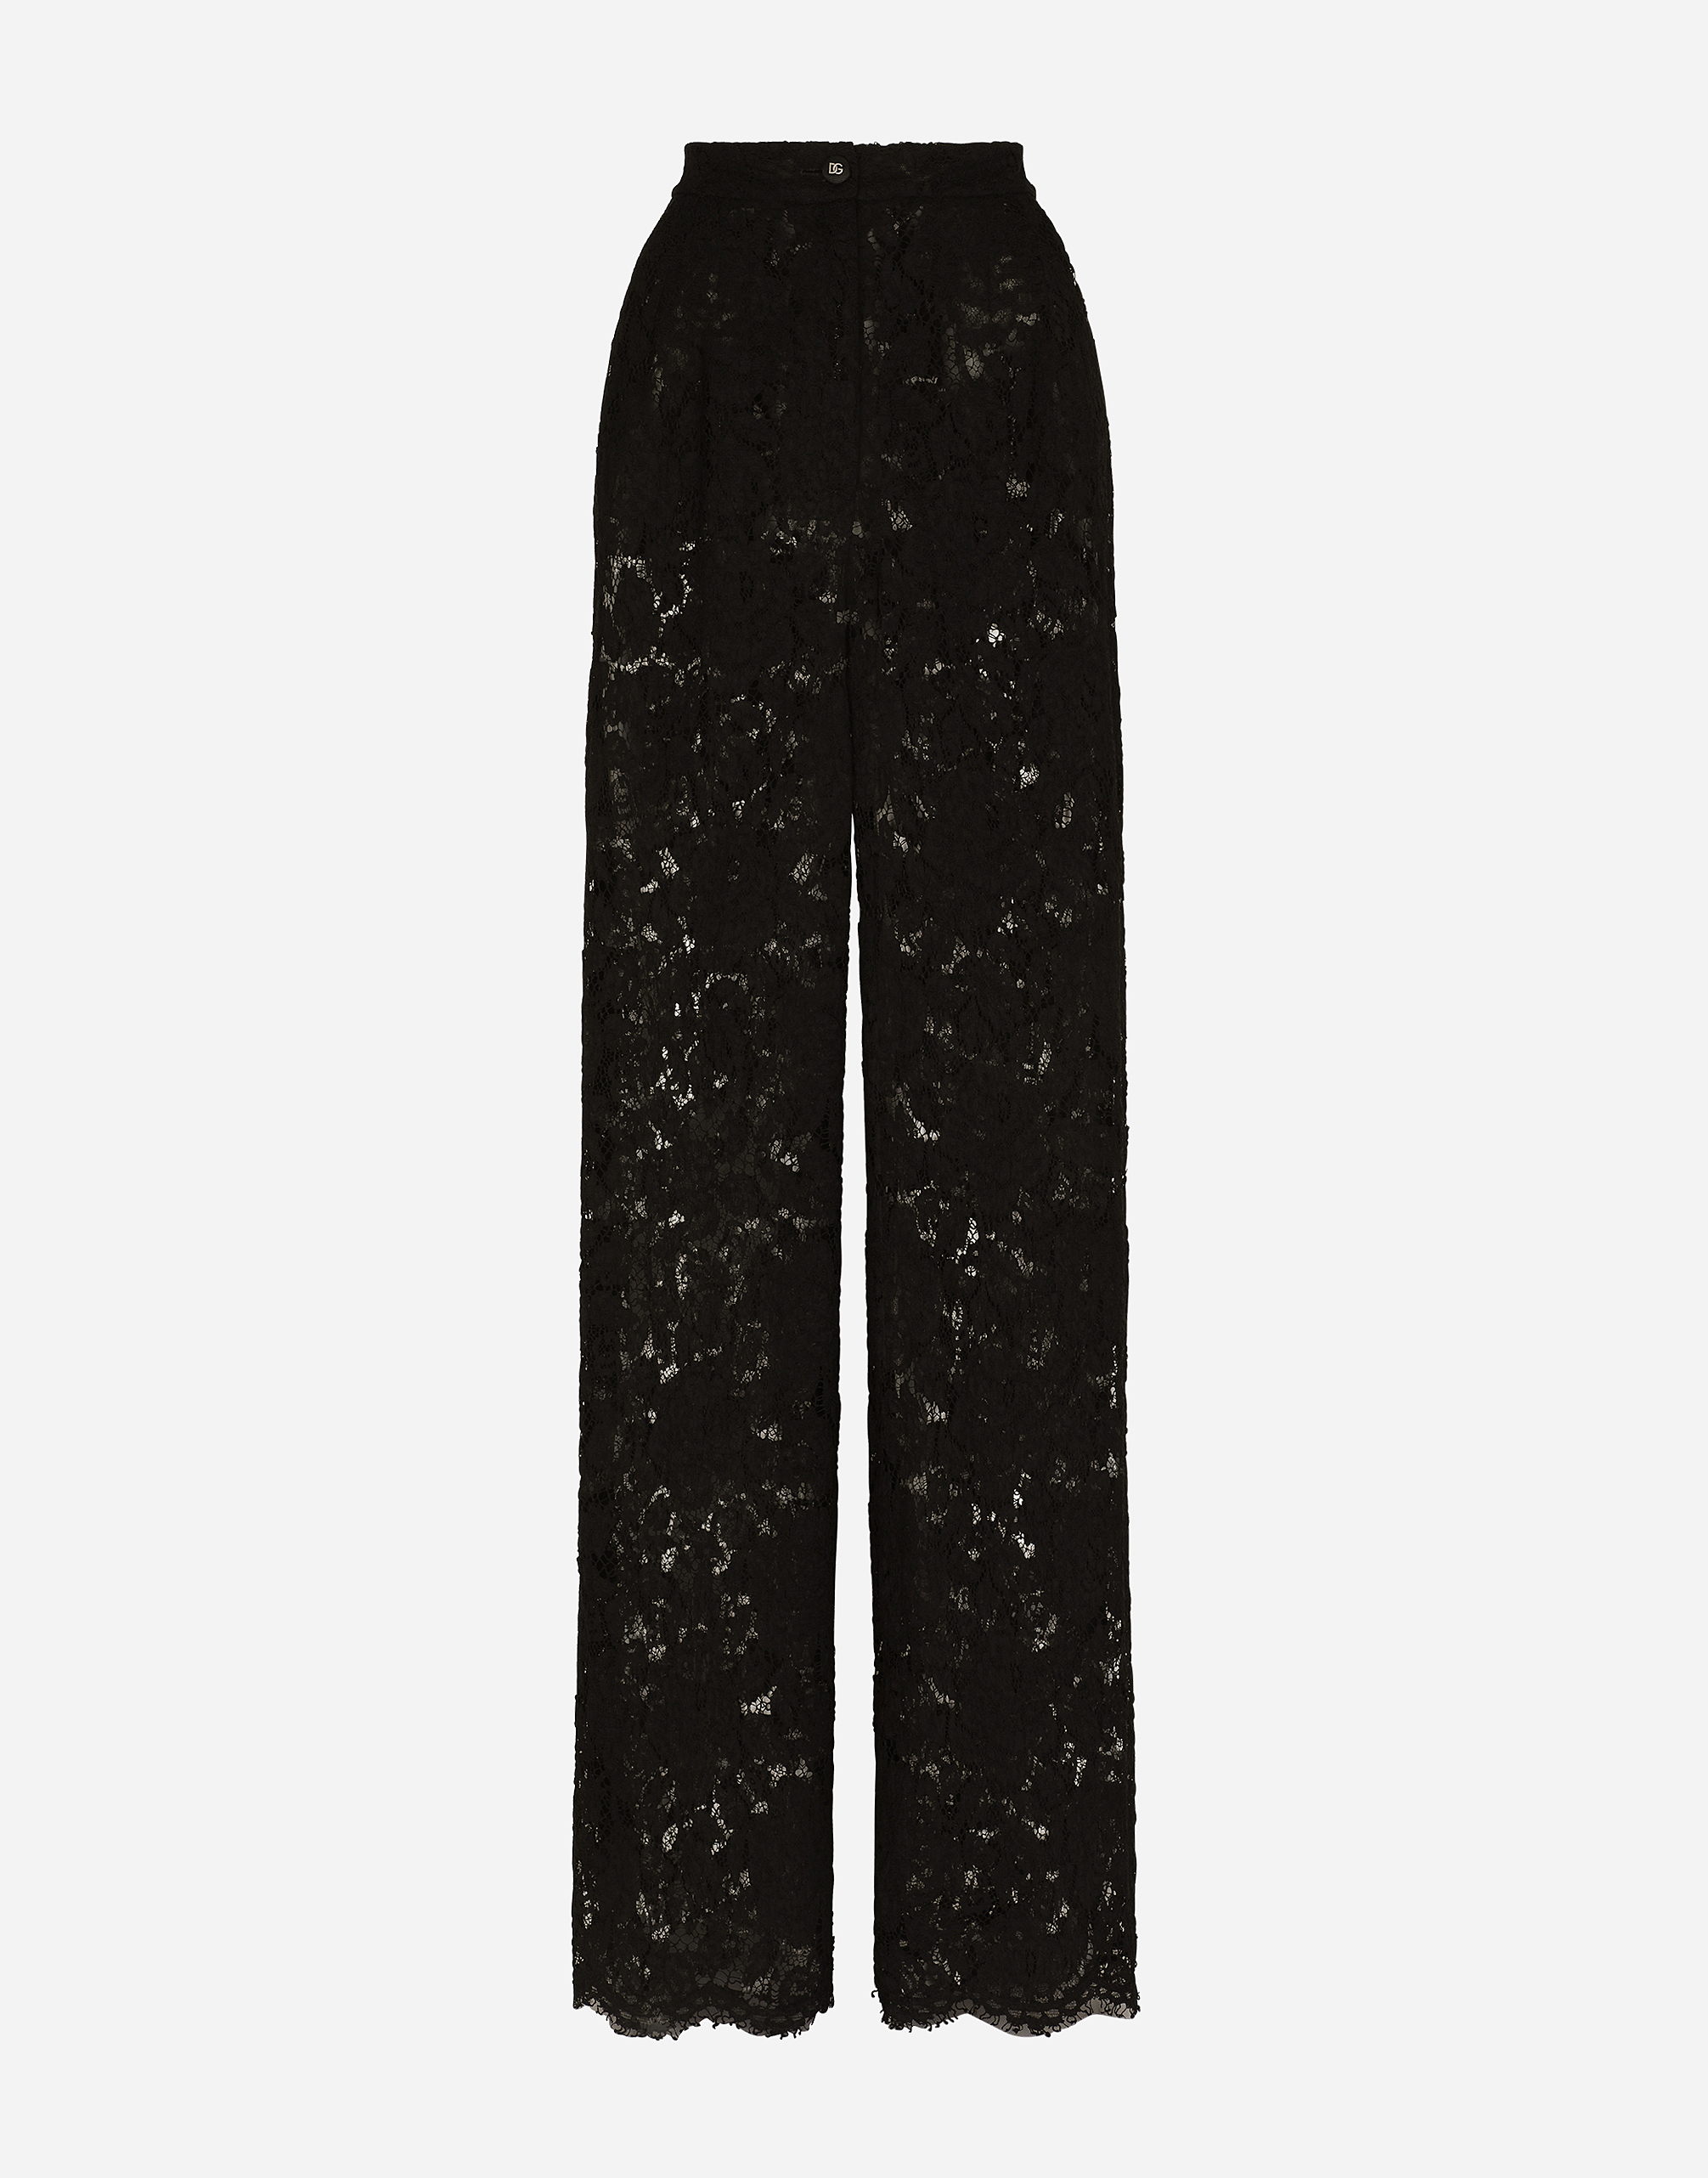 Flared branded stretch lace pants in Black